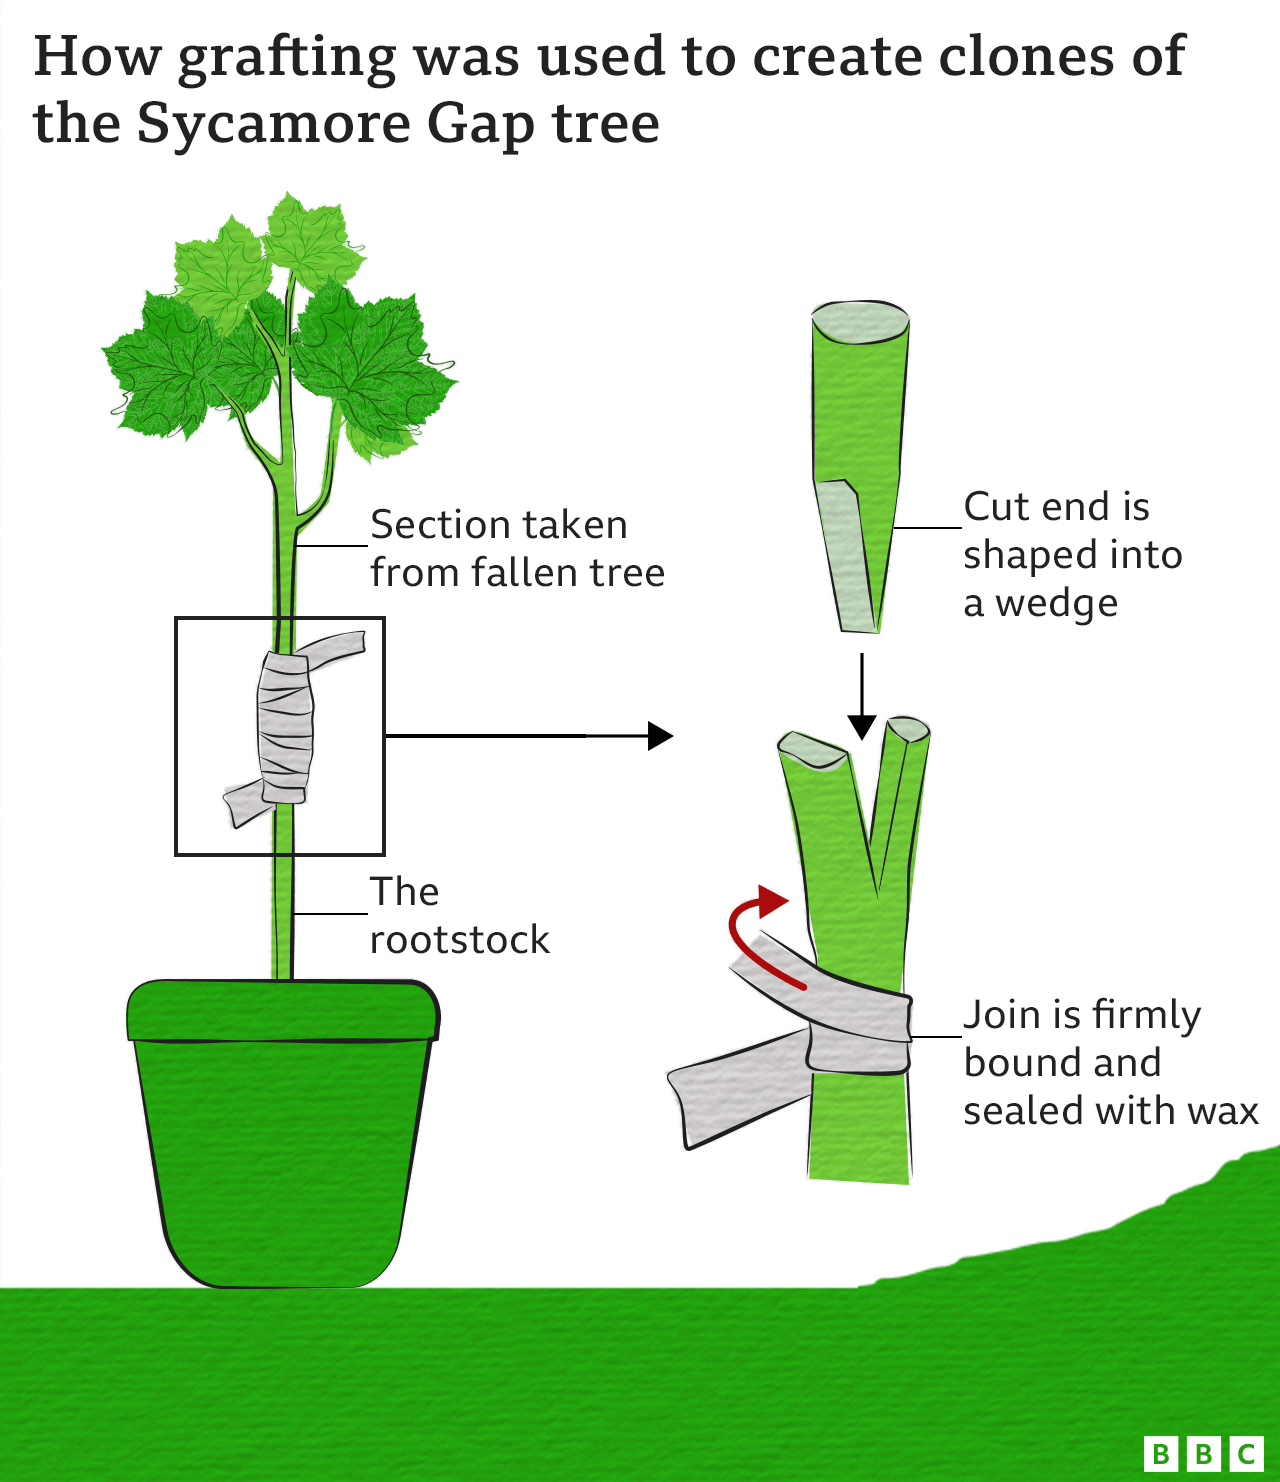 Graphic showing the grafting process where a section from a tree is inserted and bound into a rootstock from another tree to create a genetic clone.